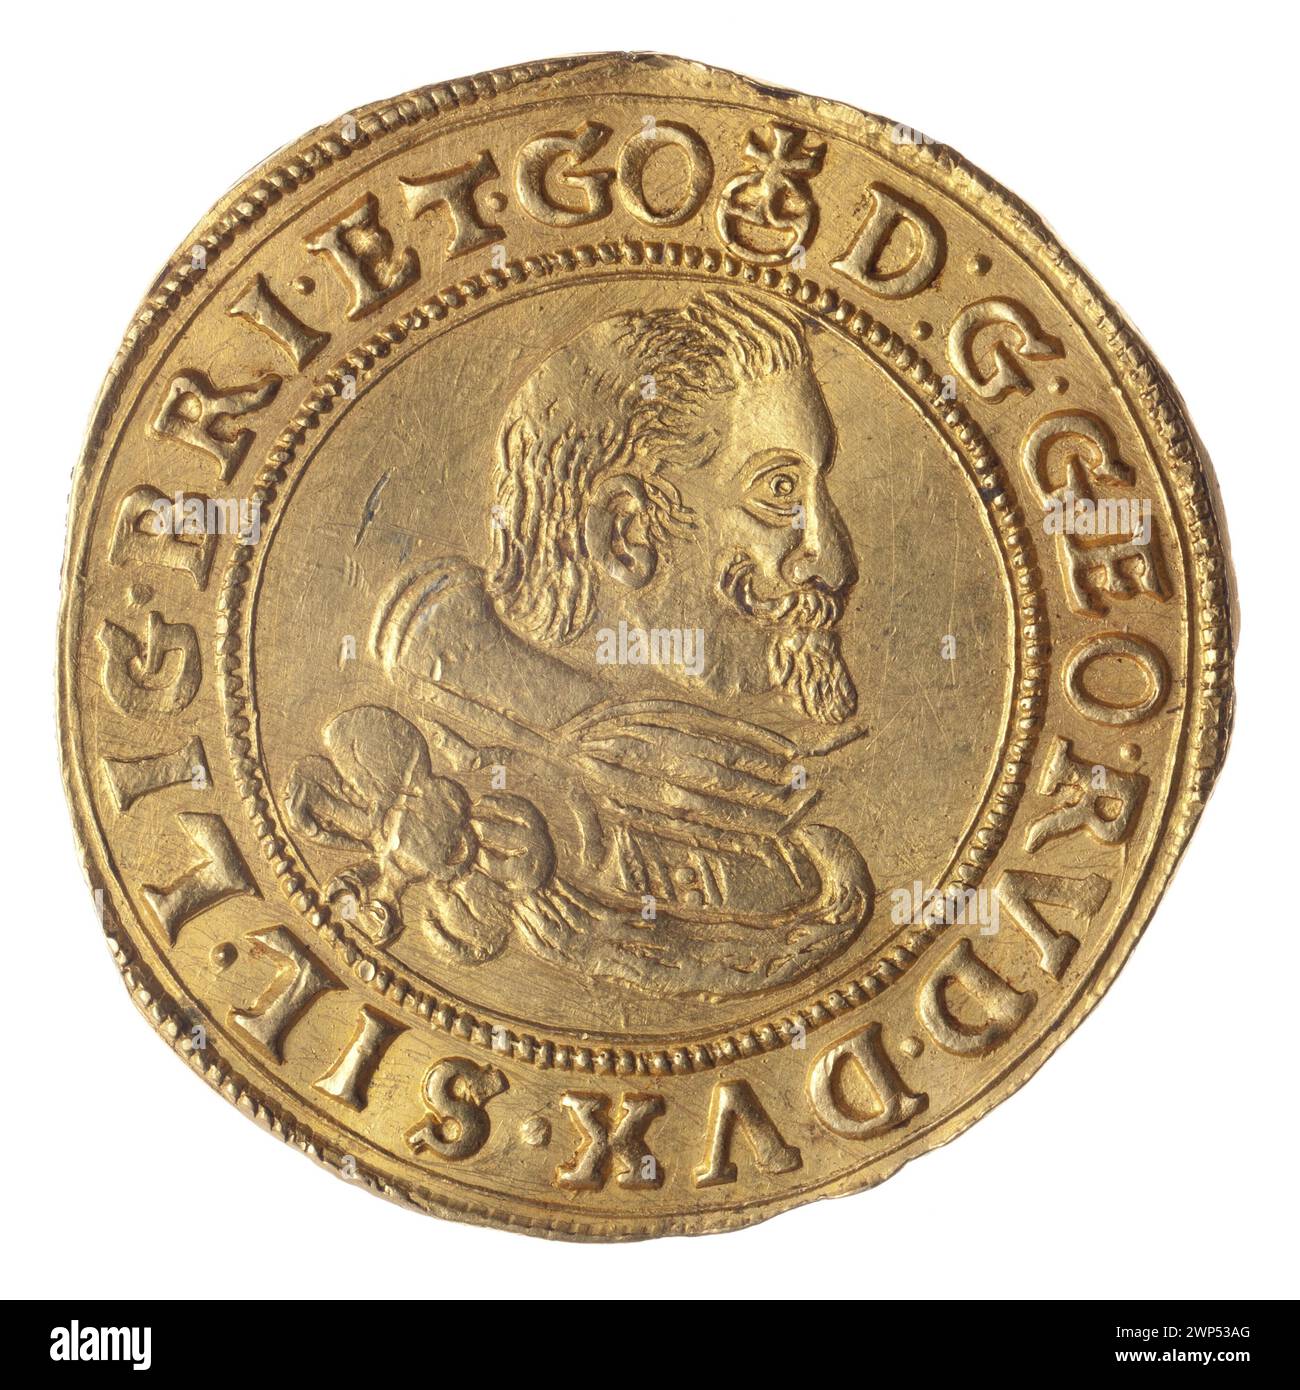 3 ducats; Jerzy Rudolf (KSI  Legnica-Brzeski; 1595-1653); 1621 (1621-00-00-1621-00-00);Jerzy Rudolf (Prince Legnica - 1595-1653), Jerzy Rudolf (Prince Legnica - 1595-1653) - iconography, Piastów (family), Duchy of Brest (coat of arms), the Duchy of Legnica -Brzeskie (coat of arms), ruler's busts, portraits, portraits in Paradna armor, portraits of the ruler with a discovered head, portraits of rulers, rosettes, four -track coat of arms, shields, coat of arms, coat of arms near Mitra Książęca, purchase (provenance) Stock Photo